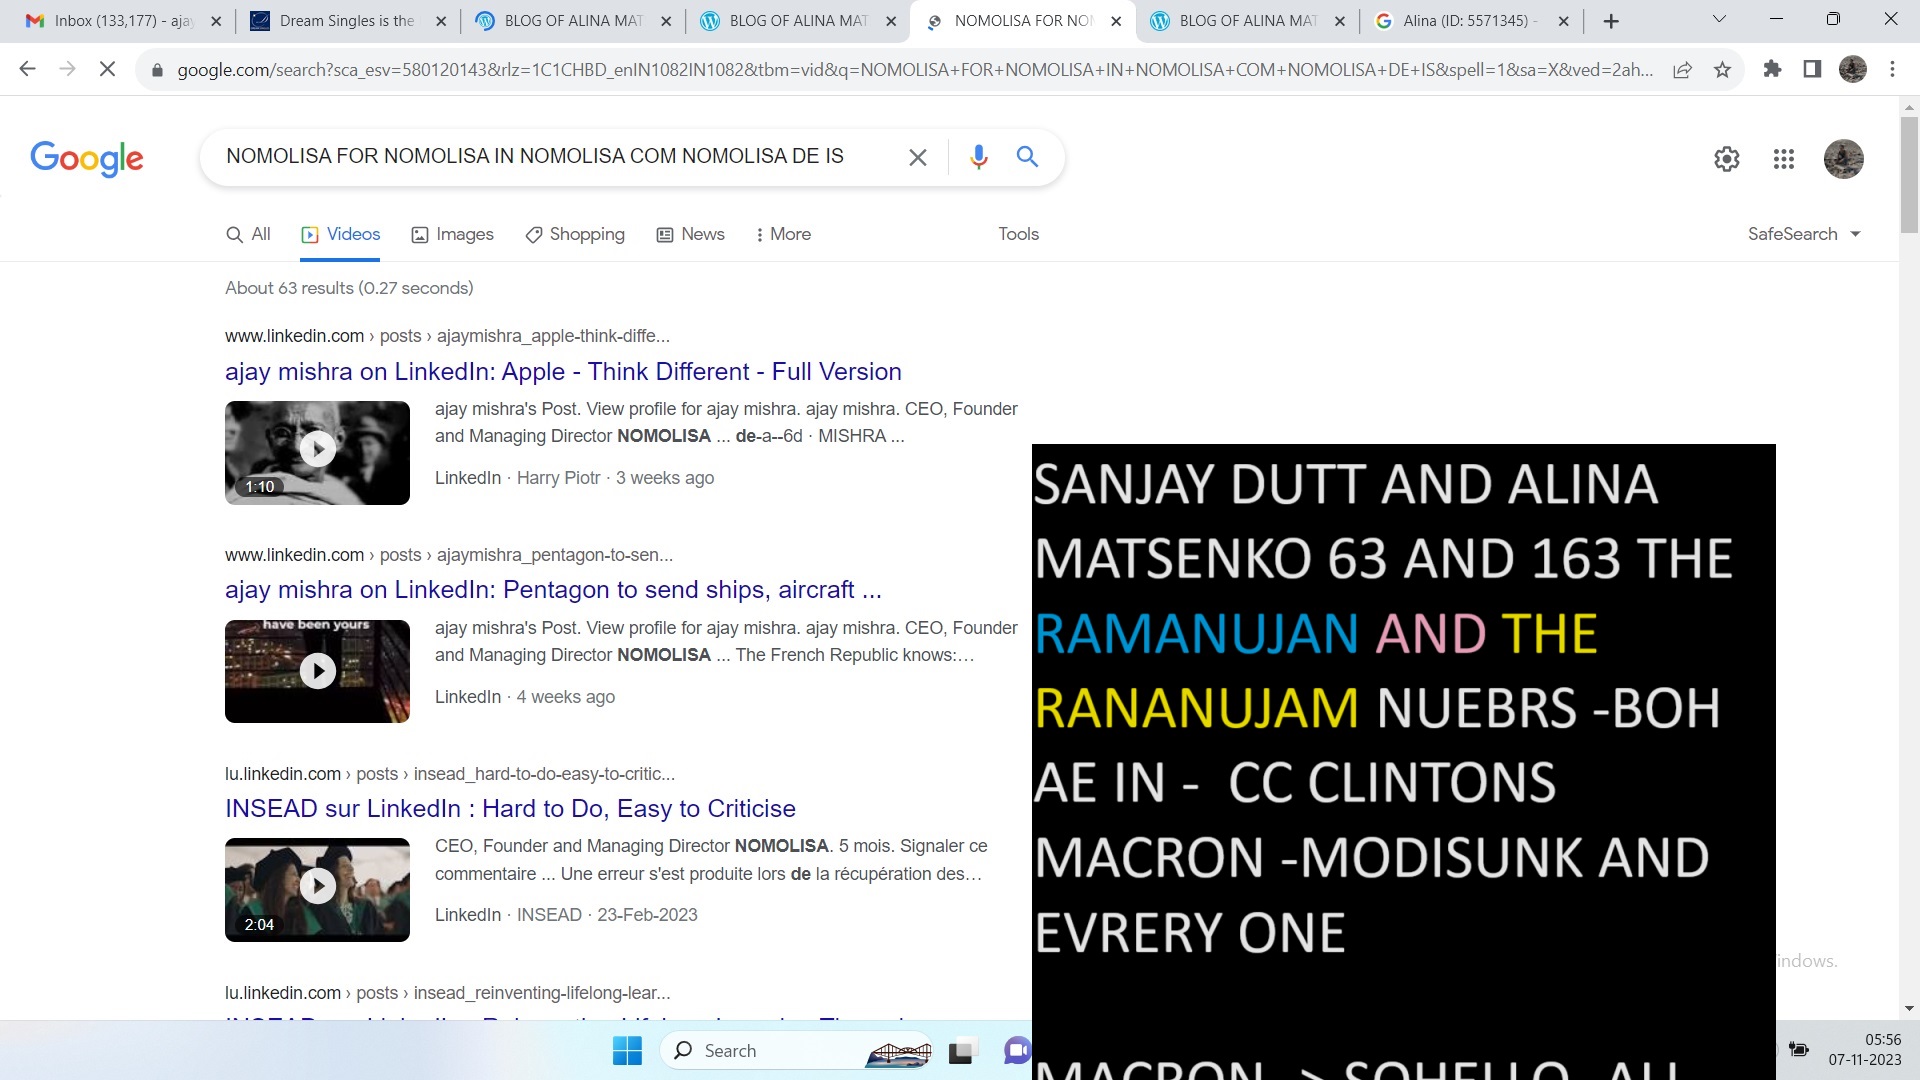 SANJAY DUTT AND ALINA MATSENKO 63 AND 163 THE RAMANUJAN AND THE RANANUJAM NUEBRS -BOH AE IN - CC CLINTONS MACRON -MODISUNK AND EVRERY ONE,,